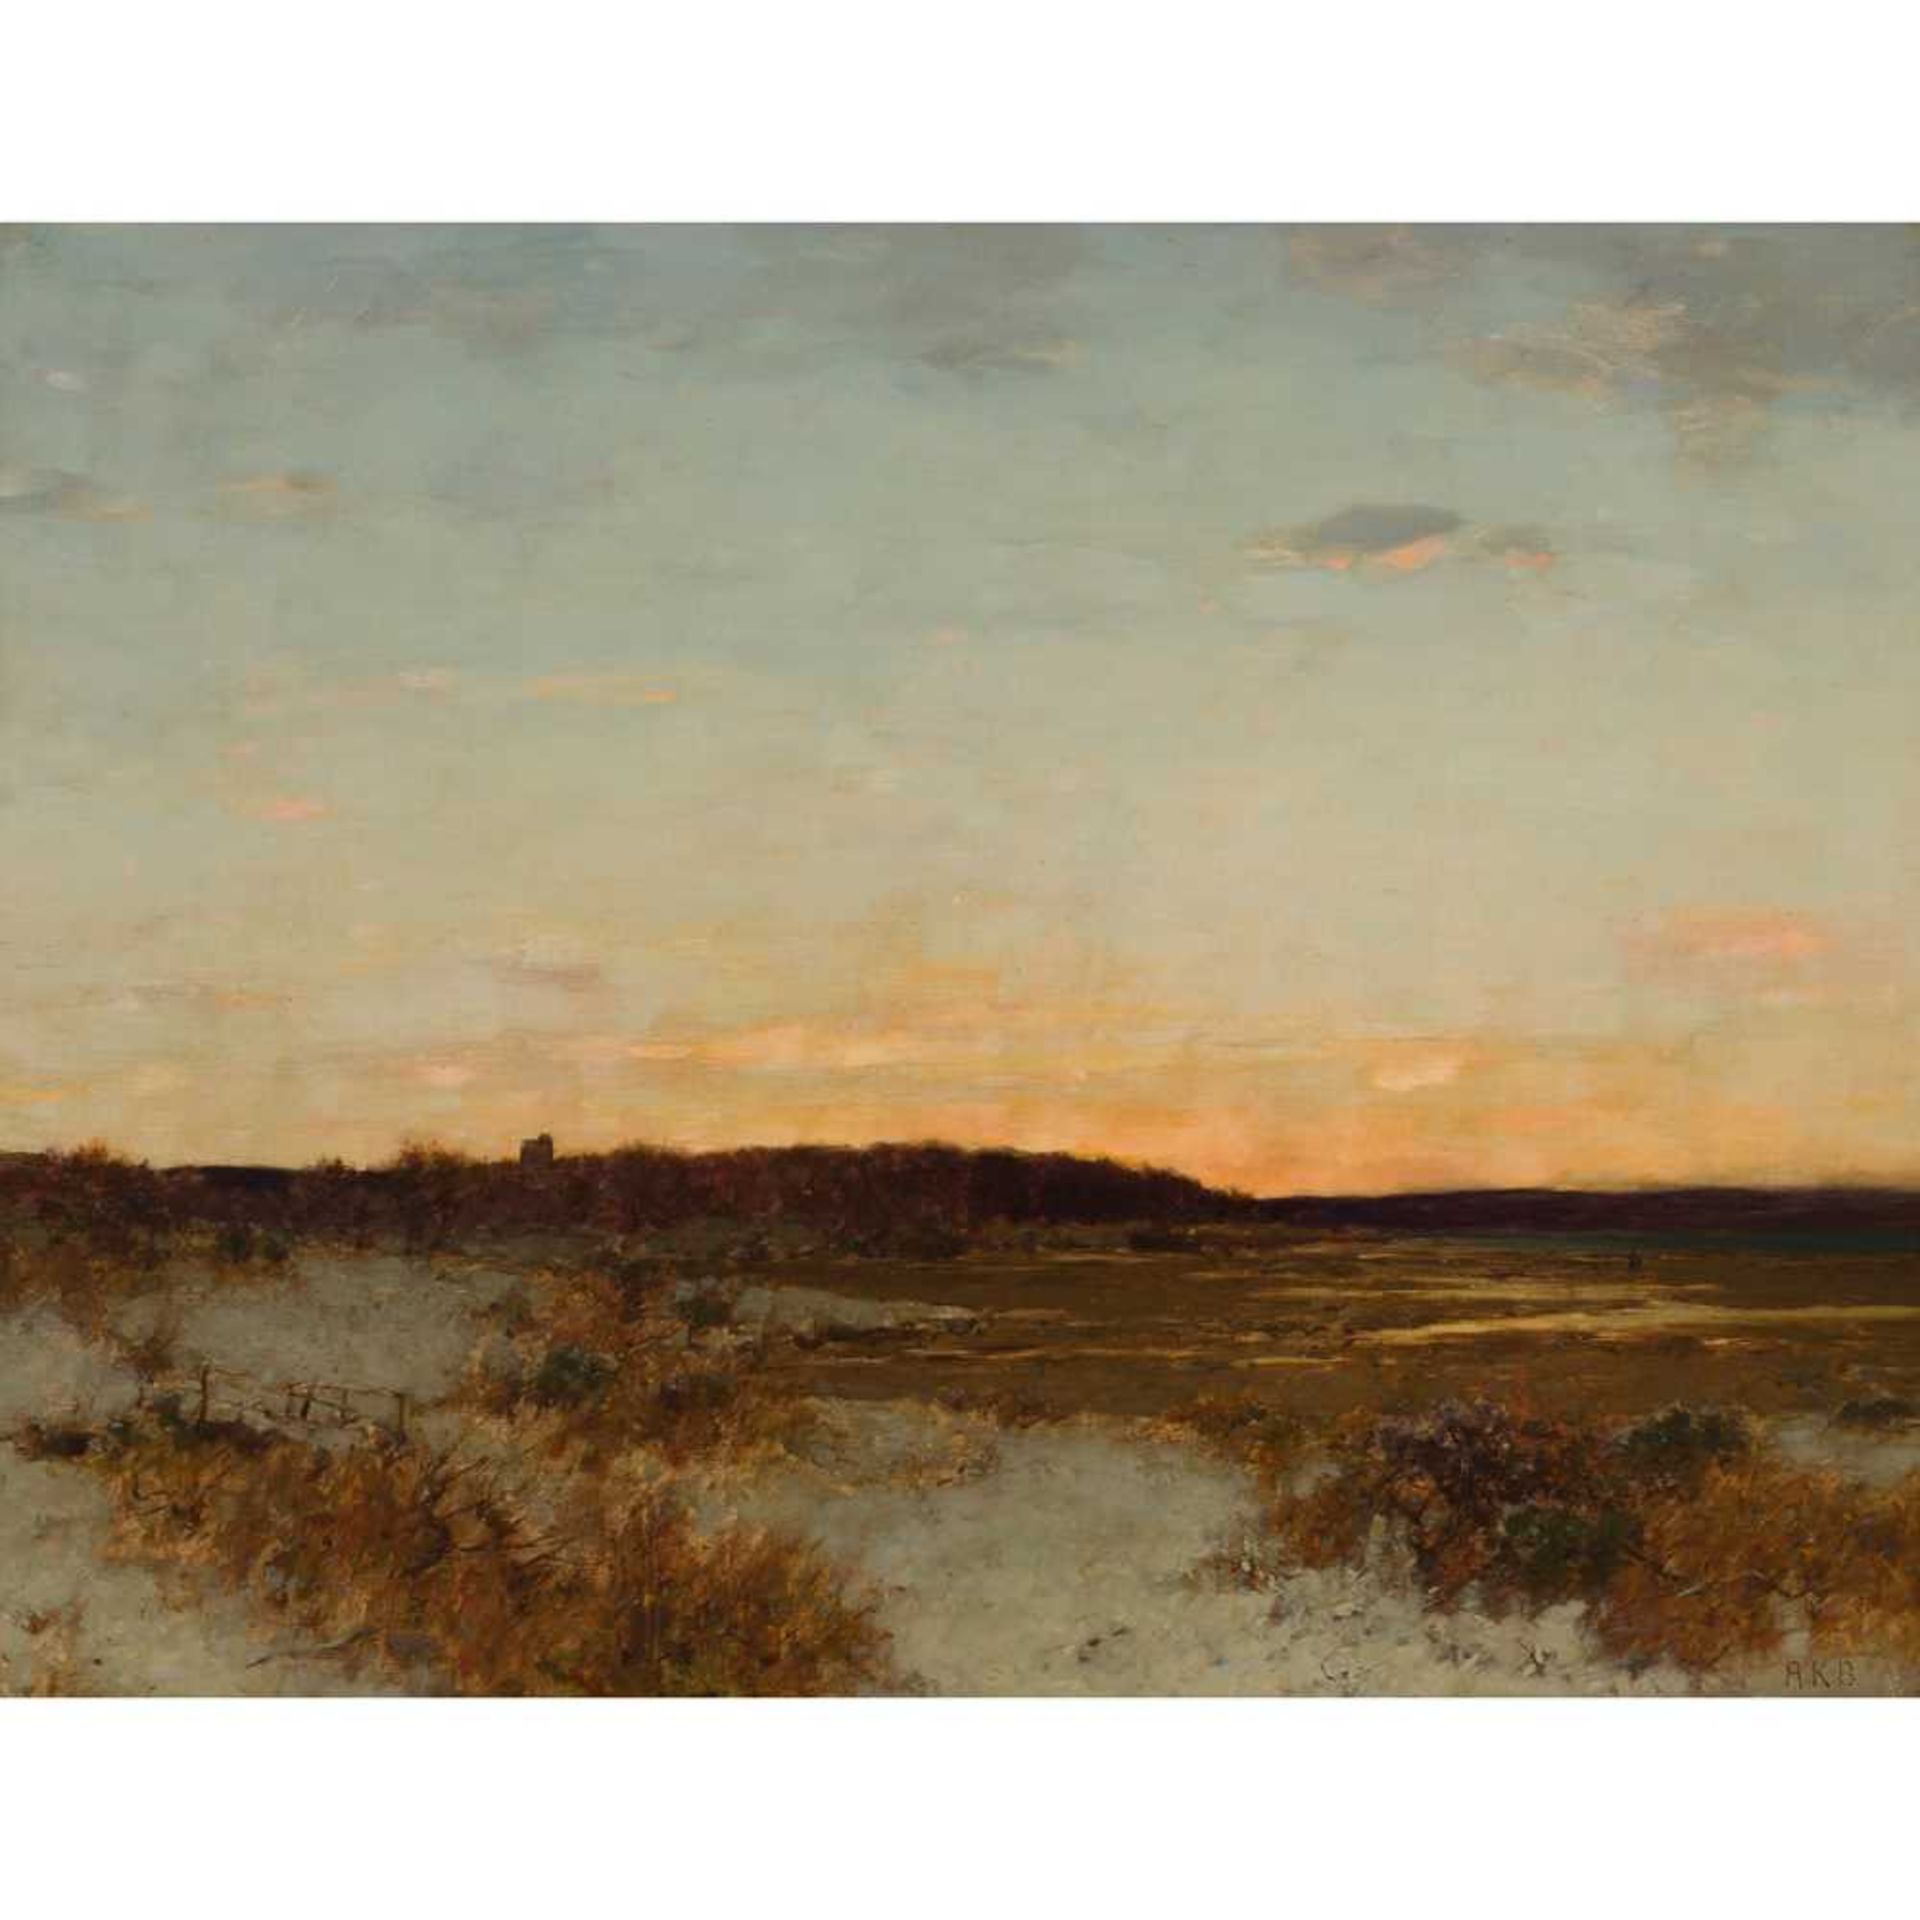 ALEXANDER KELLOCK BROWN R.S.A., R.S.W., R.I. (SCOTTISH 1849-1922) FROST ON THE MARSHES